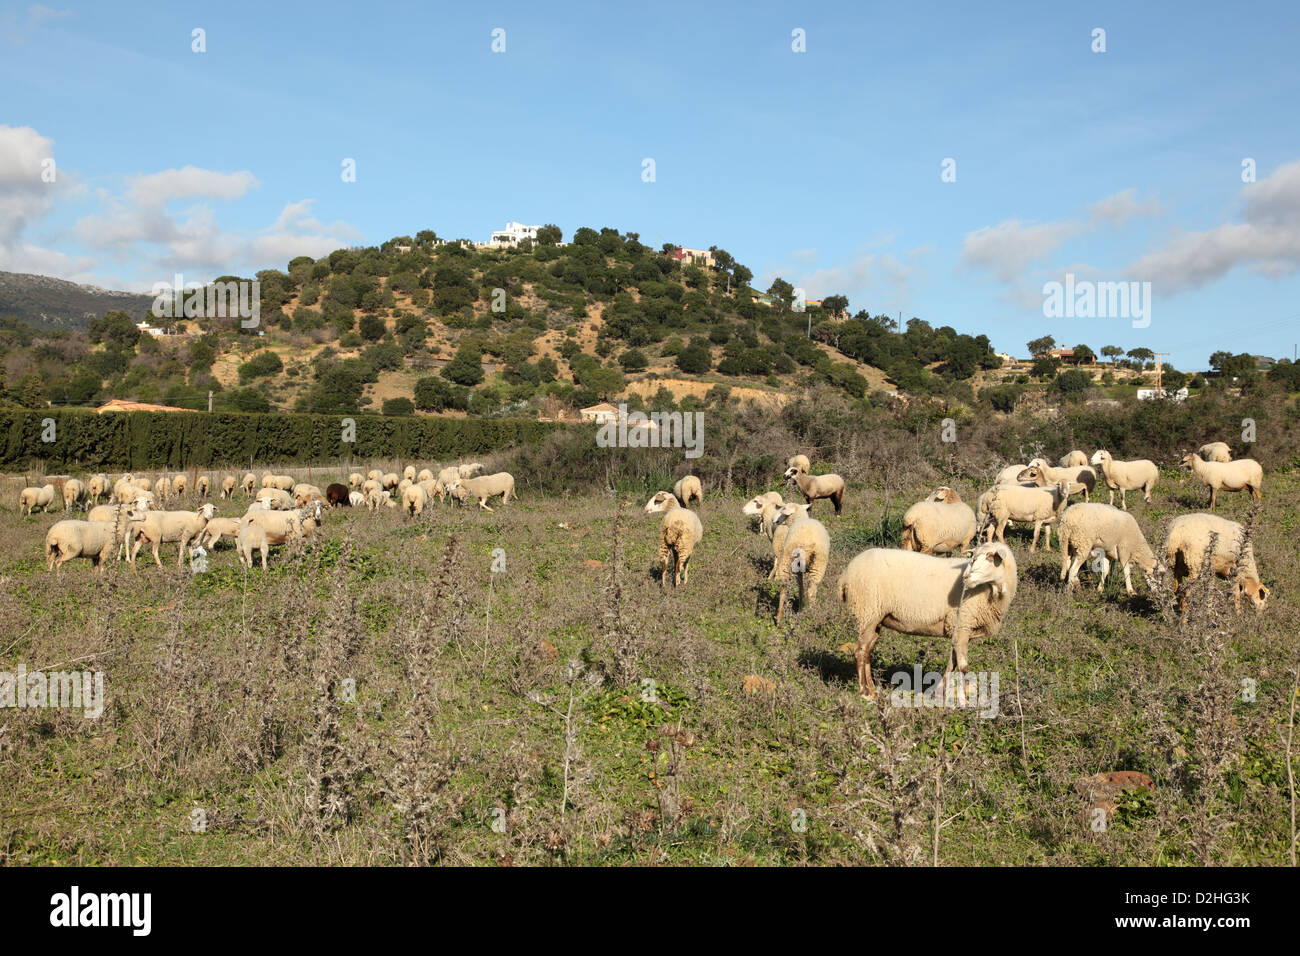 Sheeps on a pasture in Andalusia, Spain Stock Photo